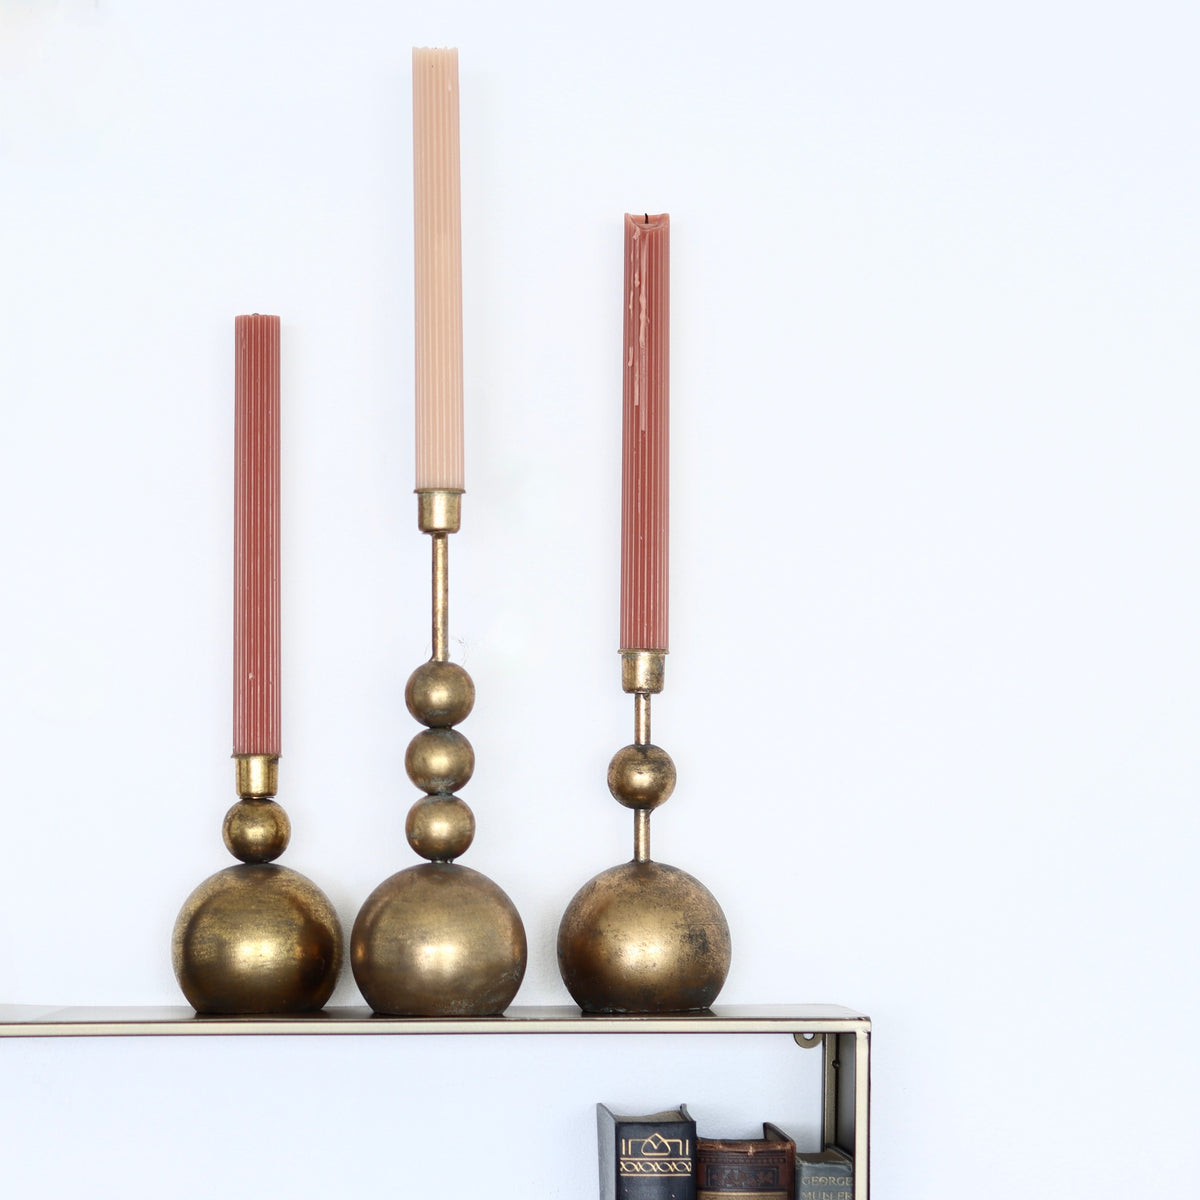 Stacked Orb Antique Brass Finish Taper Candle Holders - Set of 3 - Holistic Habitat 